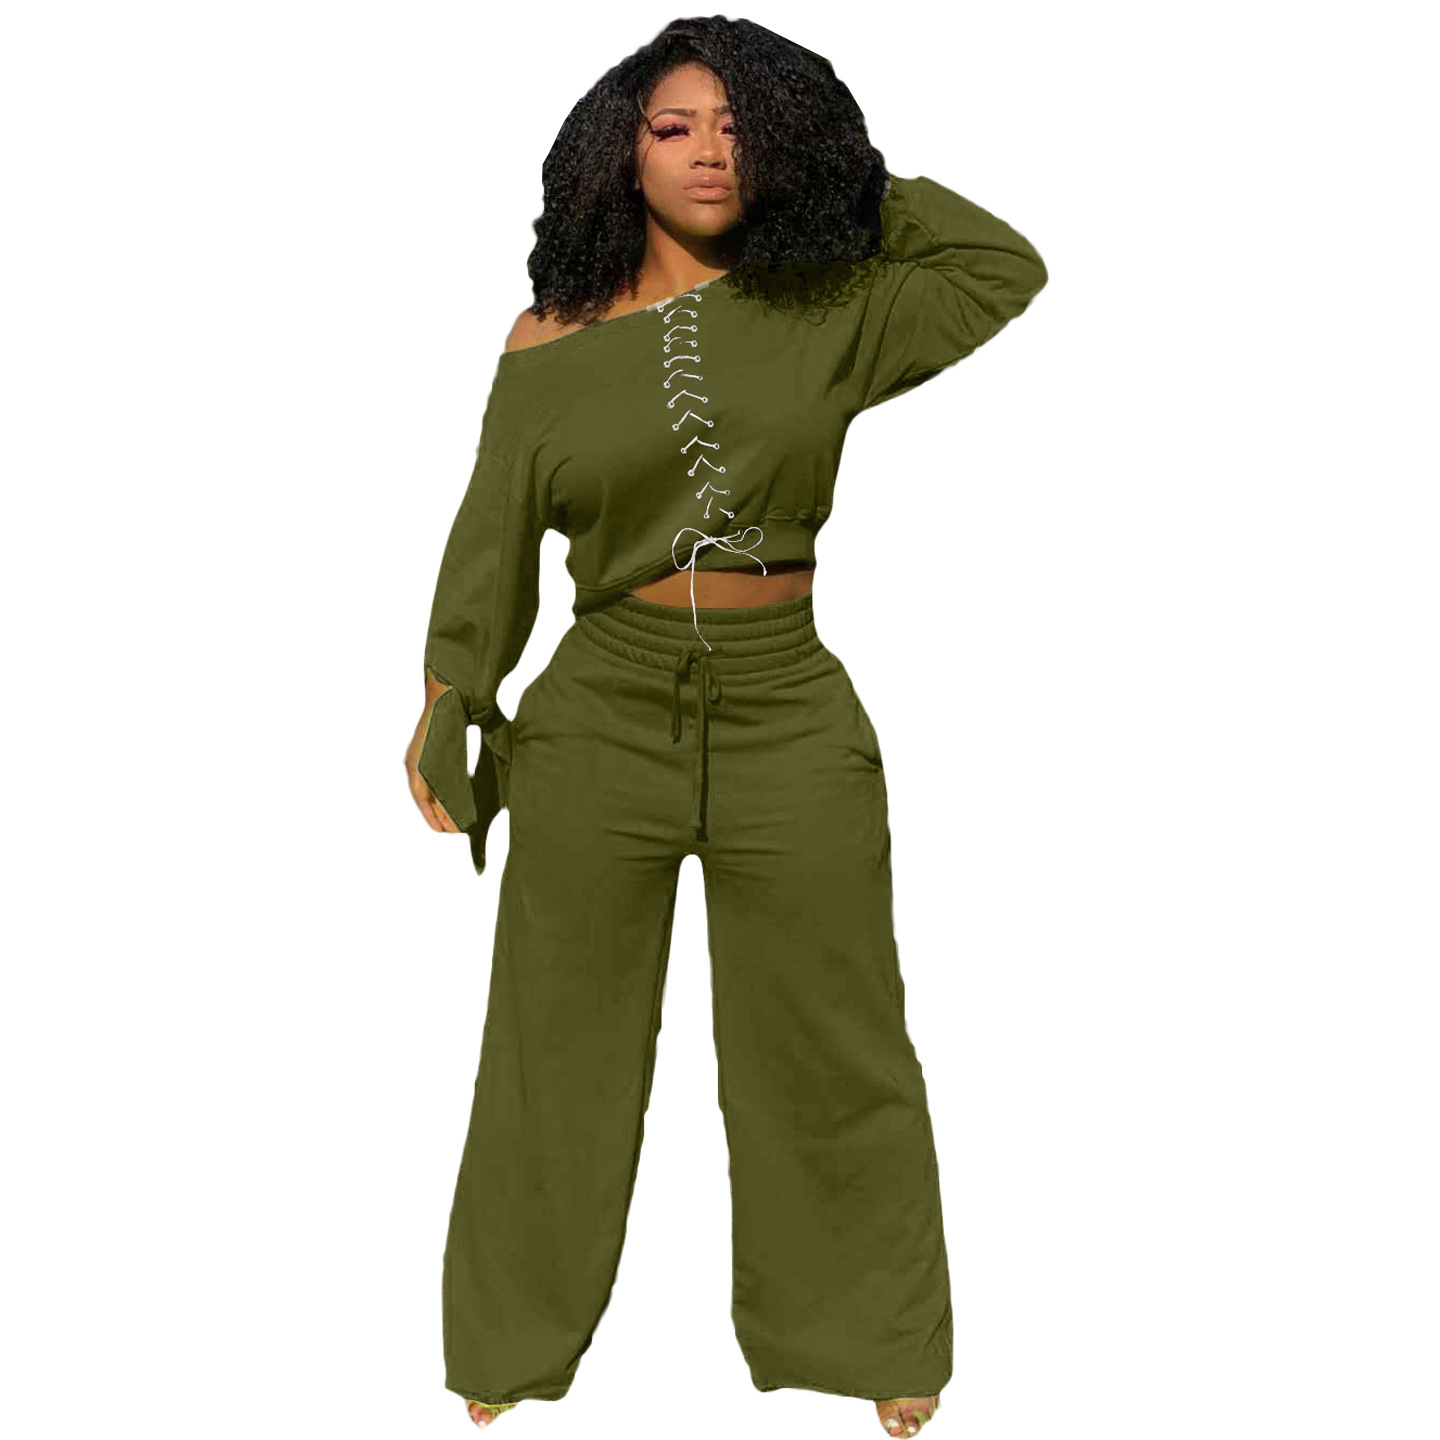 Women's Autumn Fashion Turndown Collar Short Sleeve Shirt Lace-Up Wide Leg  Pants Casual Two Piece Set - The Little Connection